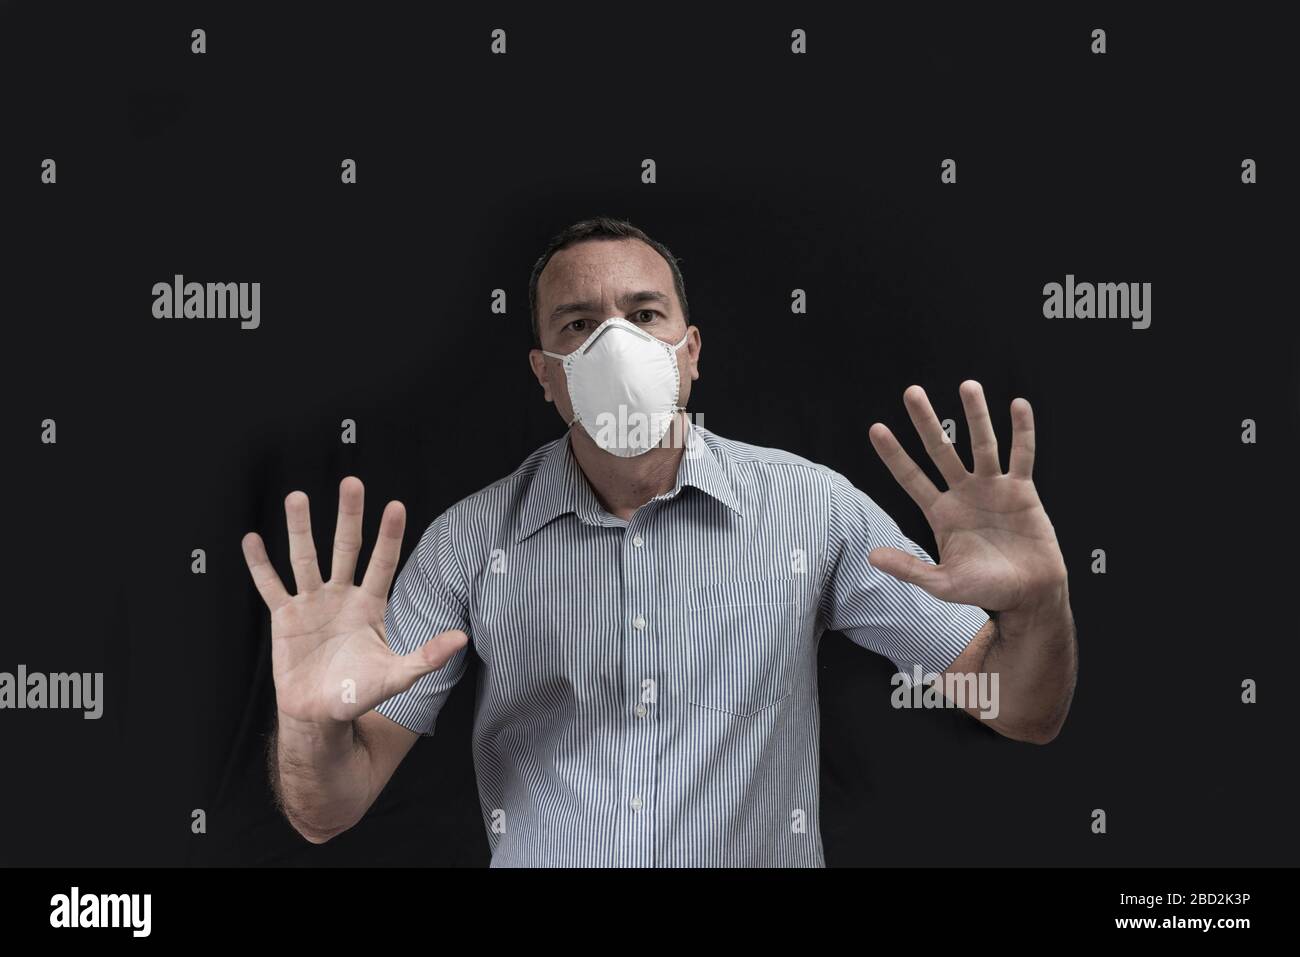 A white man wearing a protective breathing mask making a stay away gesture with both hands up, against a black background Stock Photo